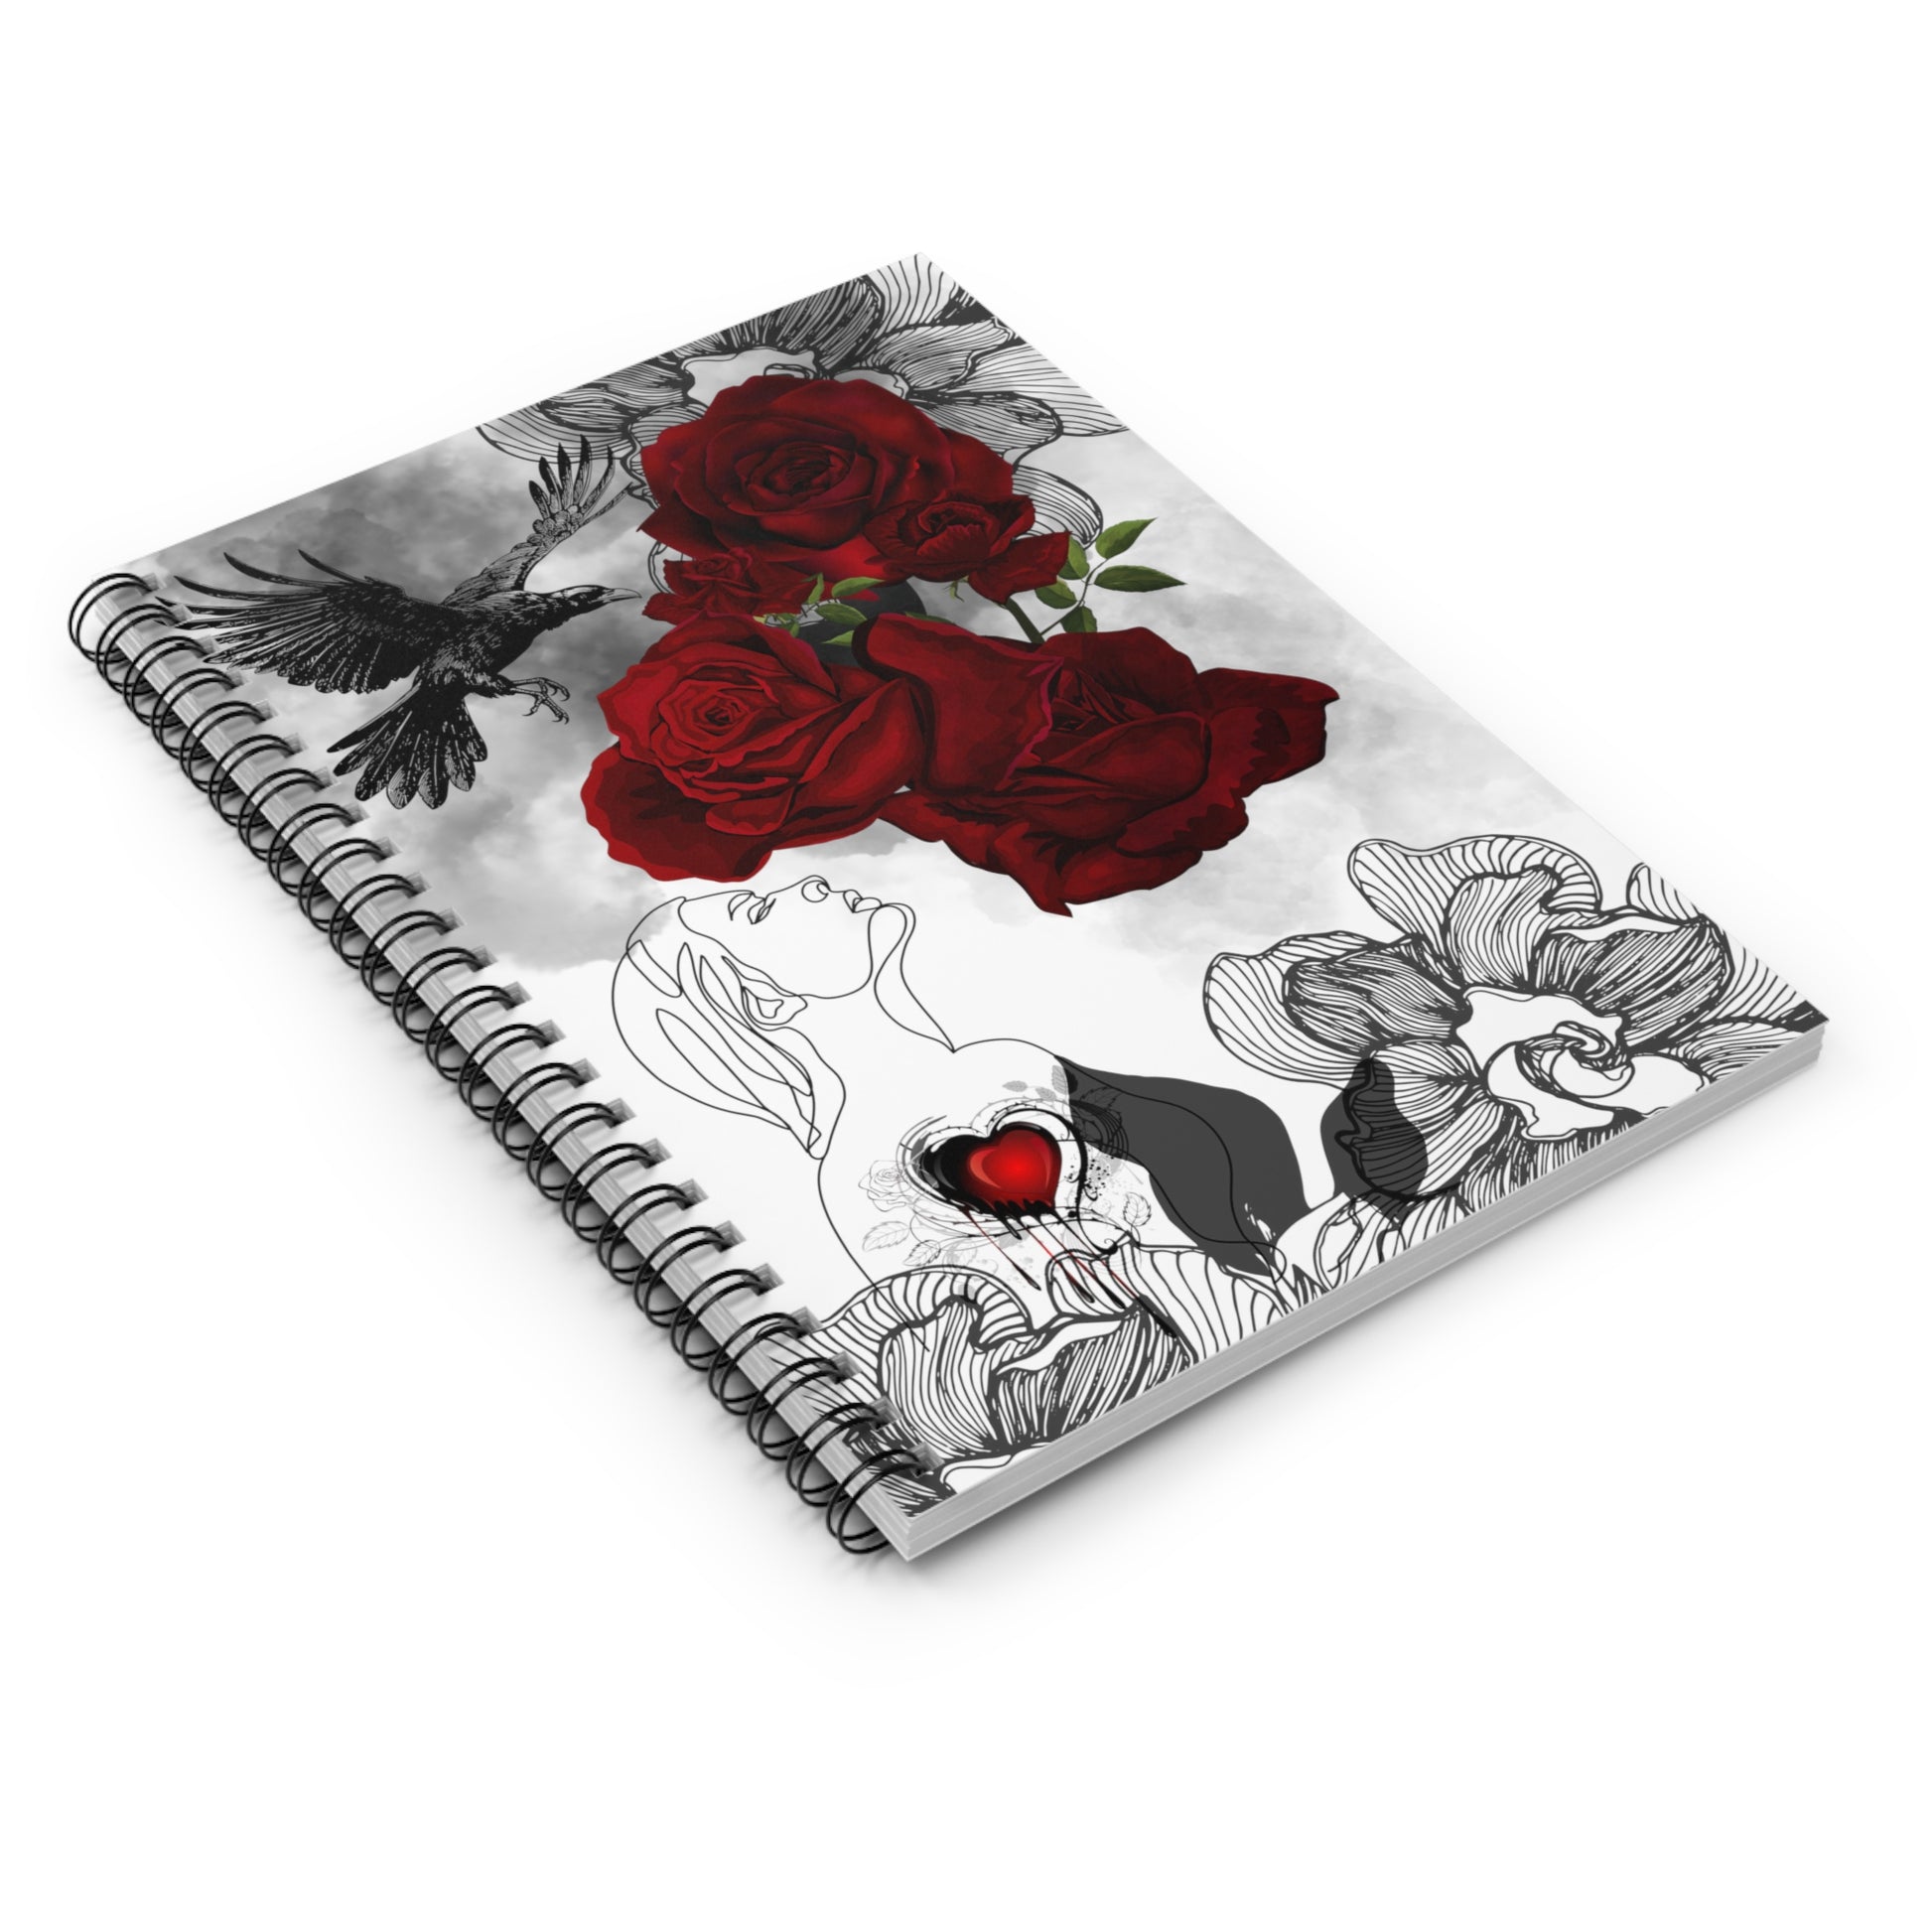 Wounded Heart: Spiral Notebook - Log Books - Journals - Diaries - and More Custom Printed by TheGlassyLass